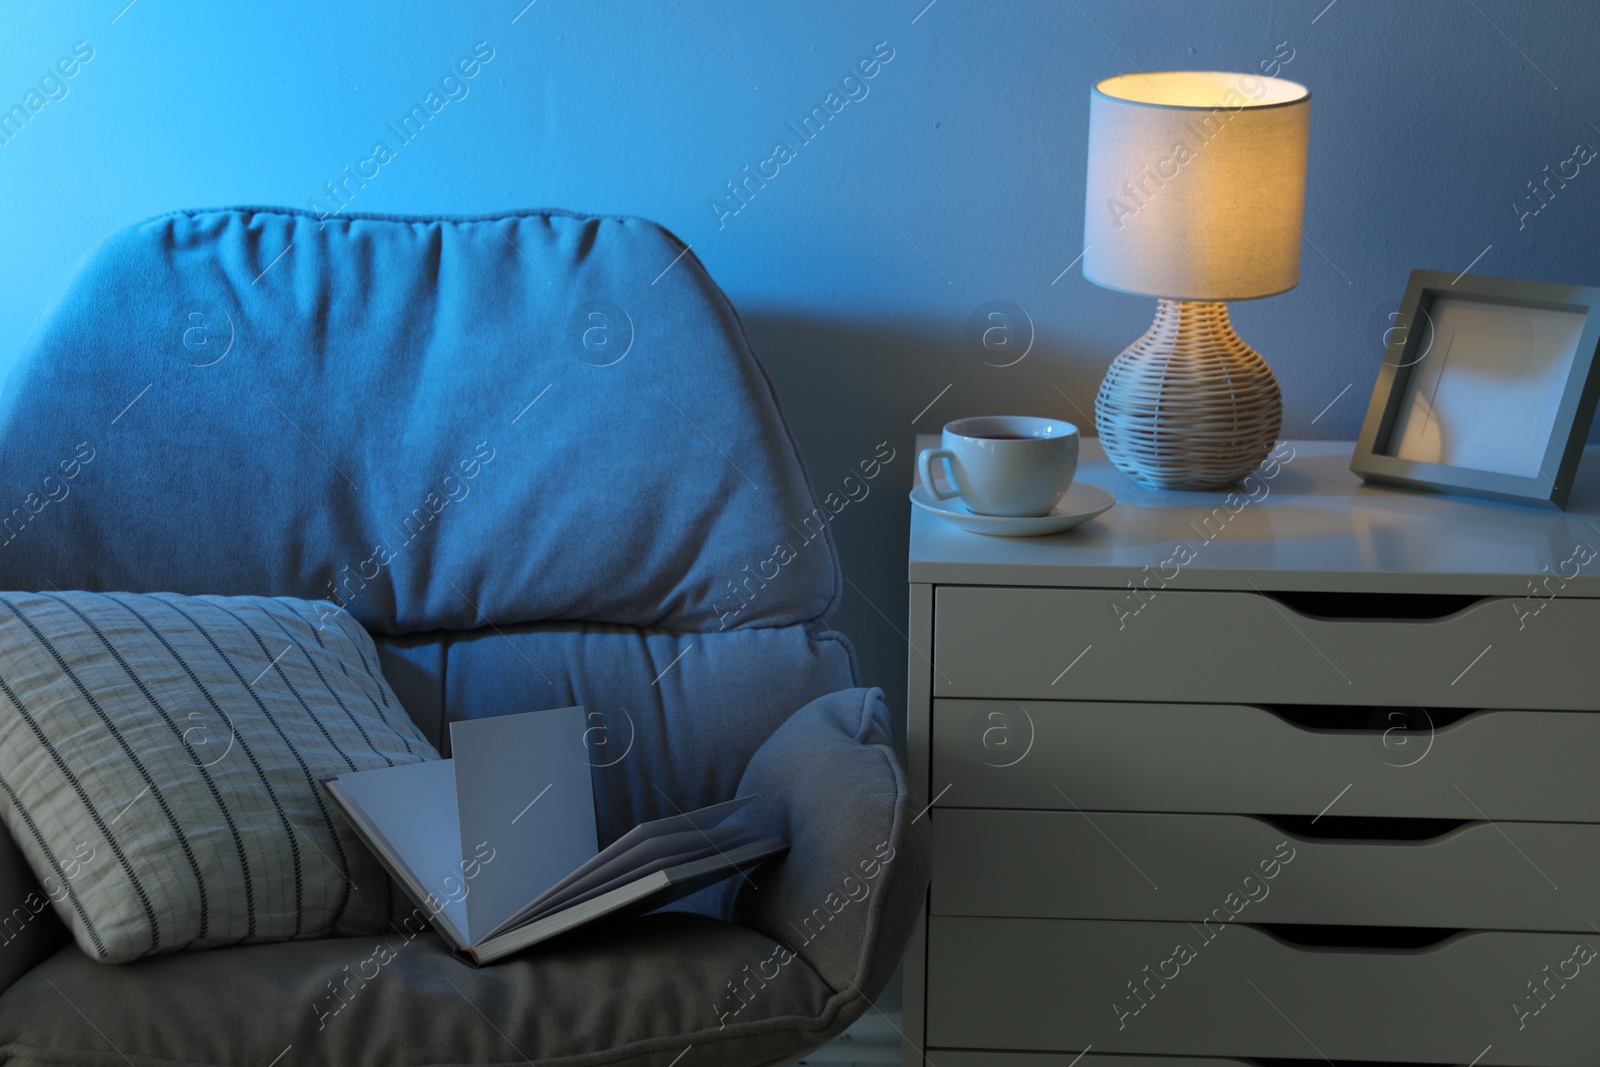 Photo of Comfortable armchair and white chest of drawers in room at night